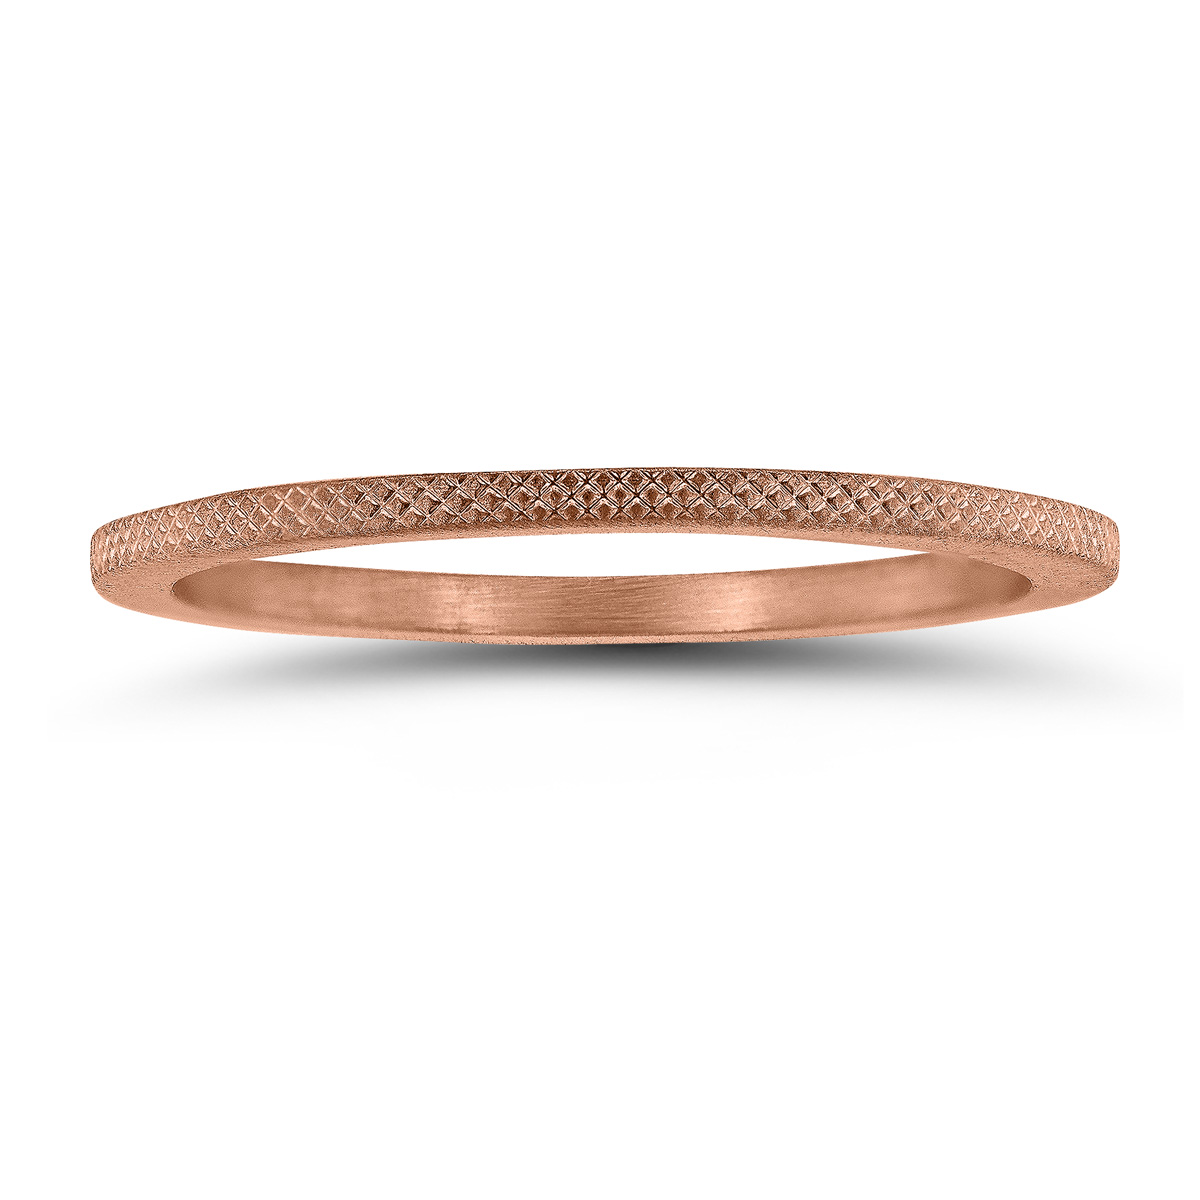 1MM Thin Wedding Band with Cross Hatch Center in 14K Rose Gold